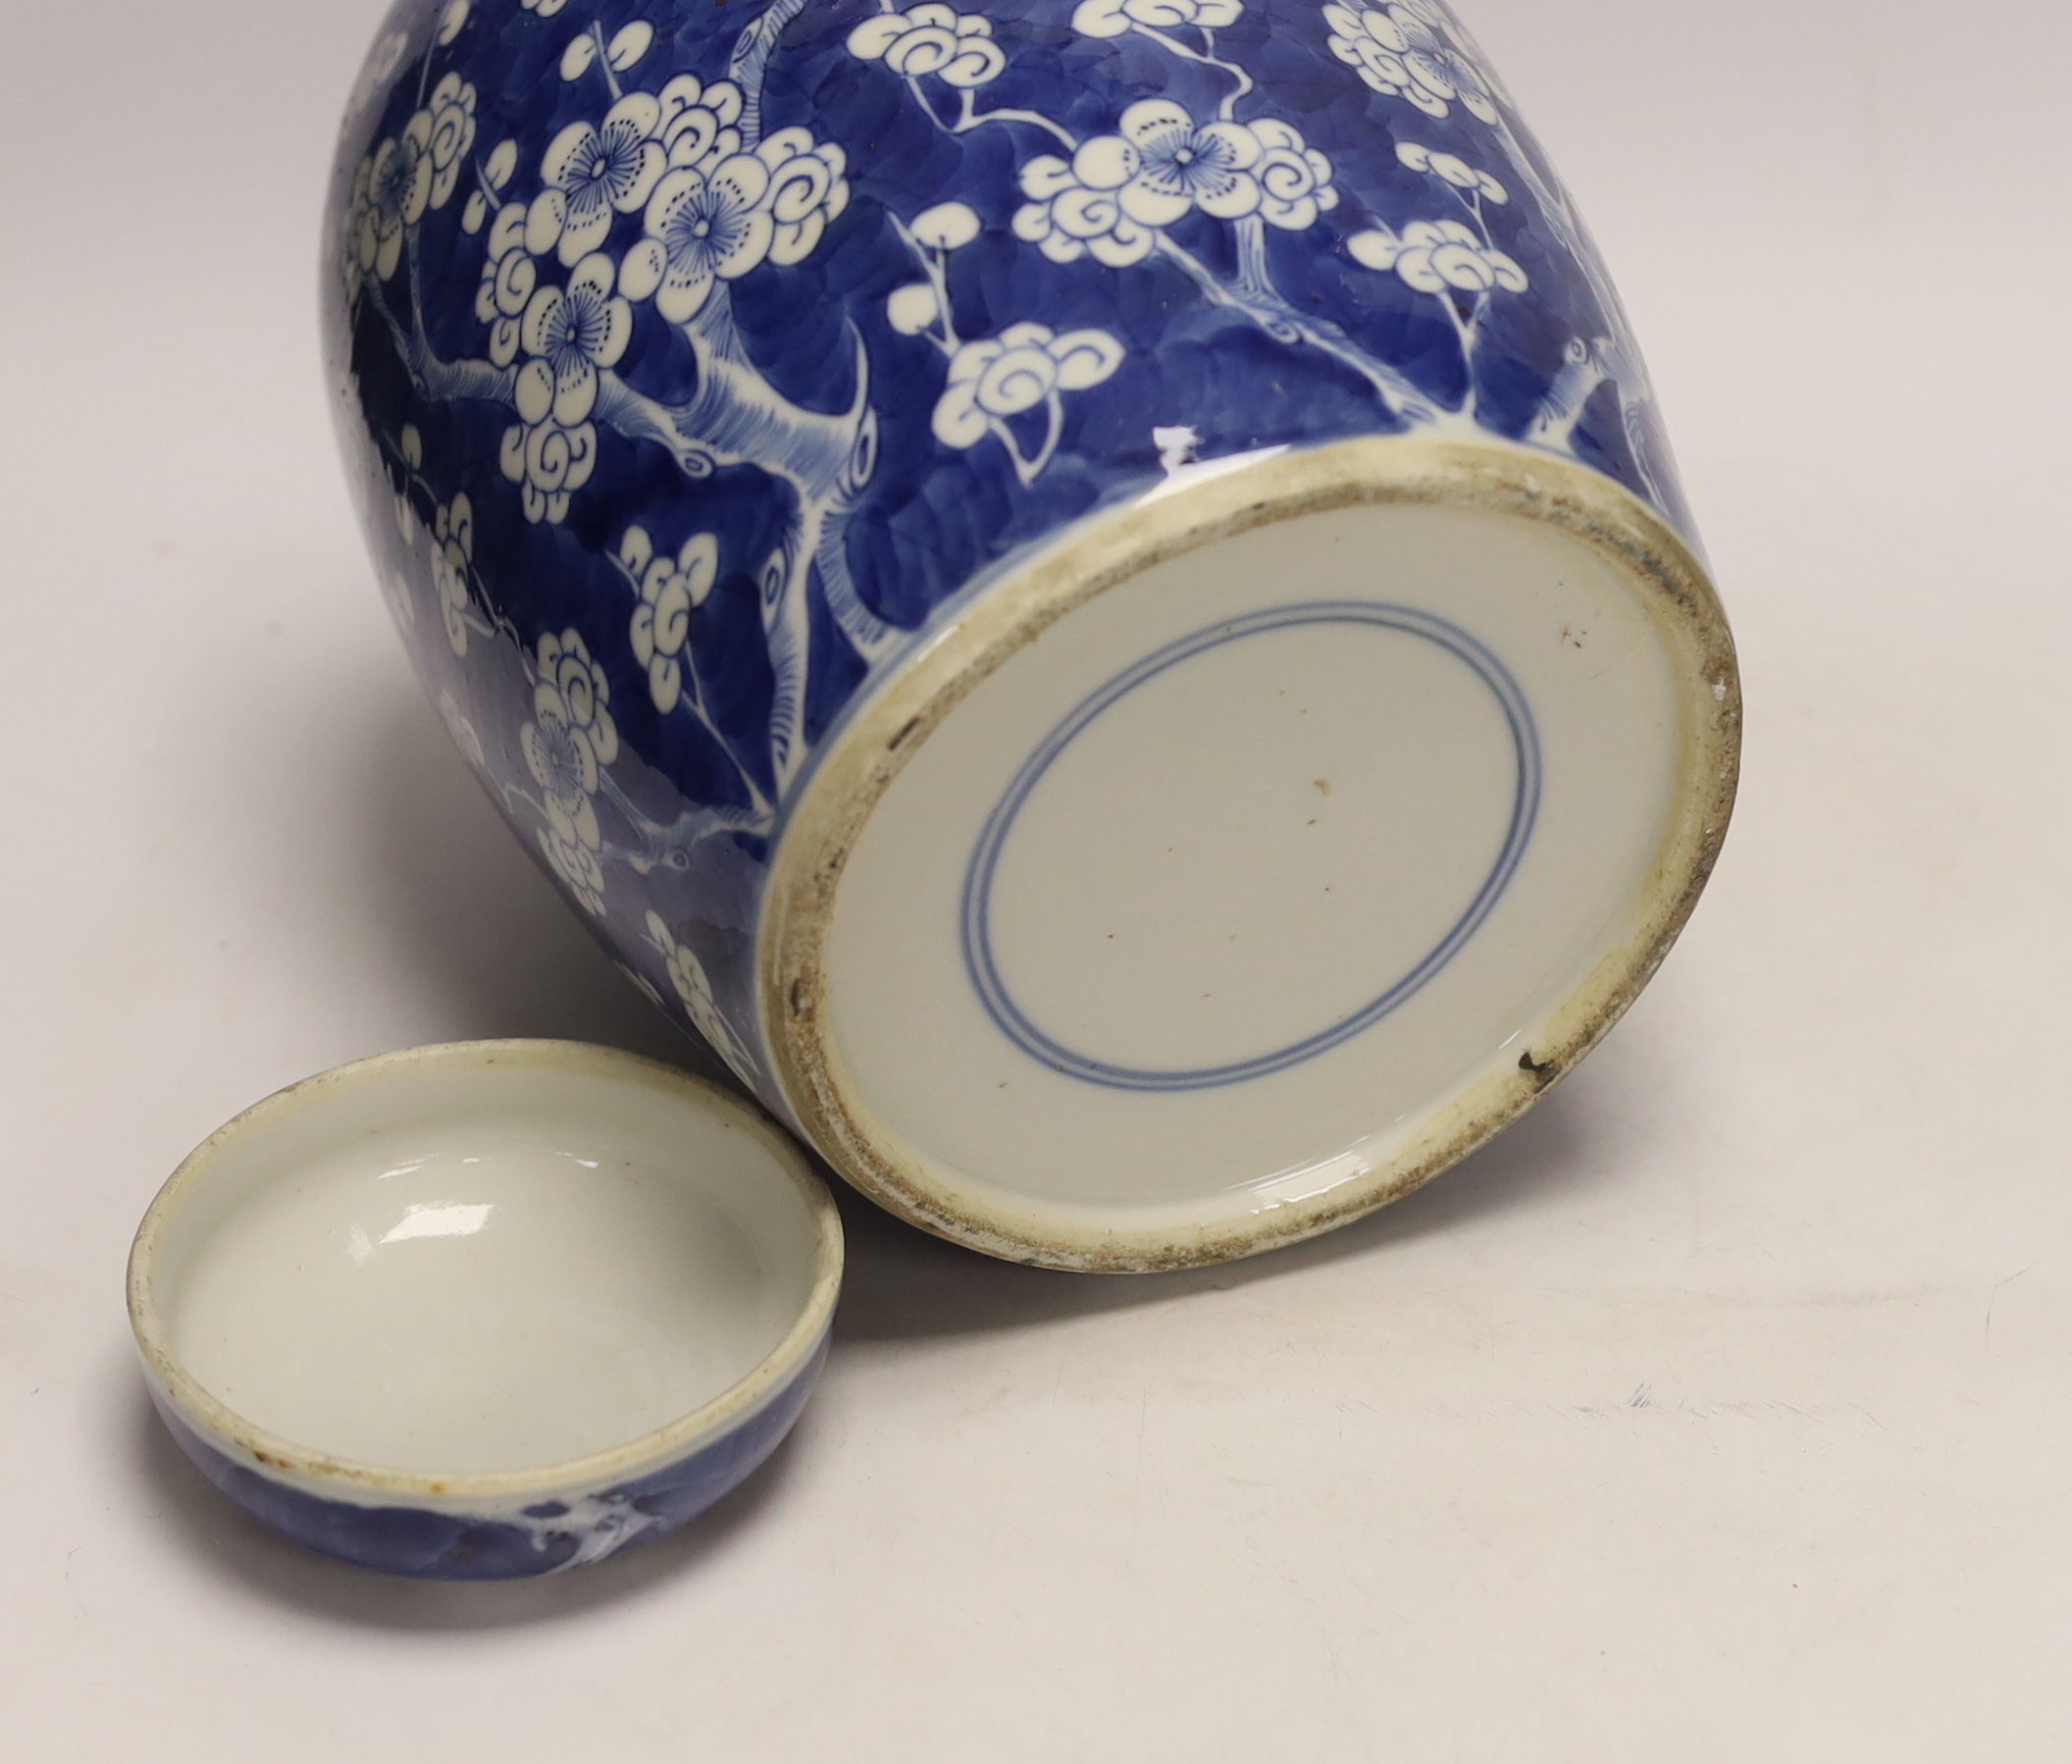 A Chinese blue and white prunus jar and cover, late 19th/early 20th century, 29cm high